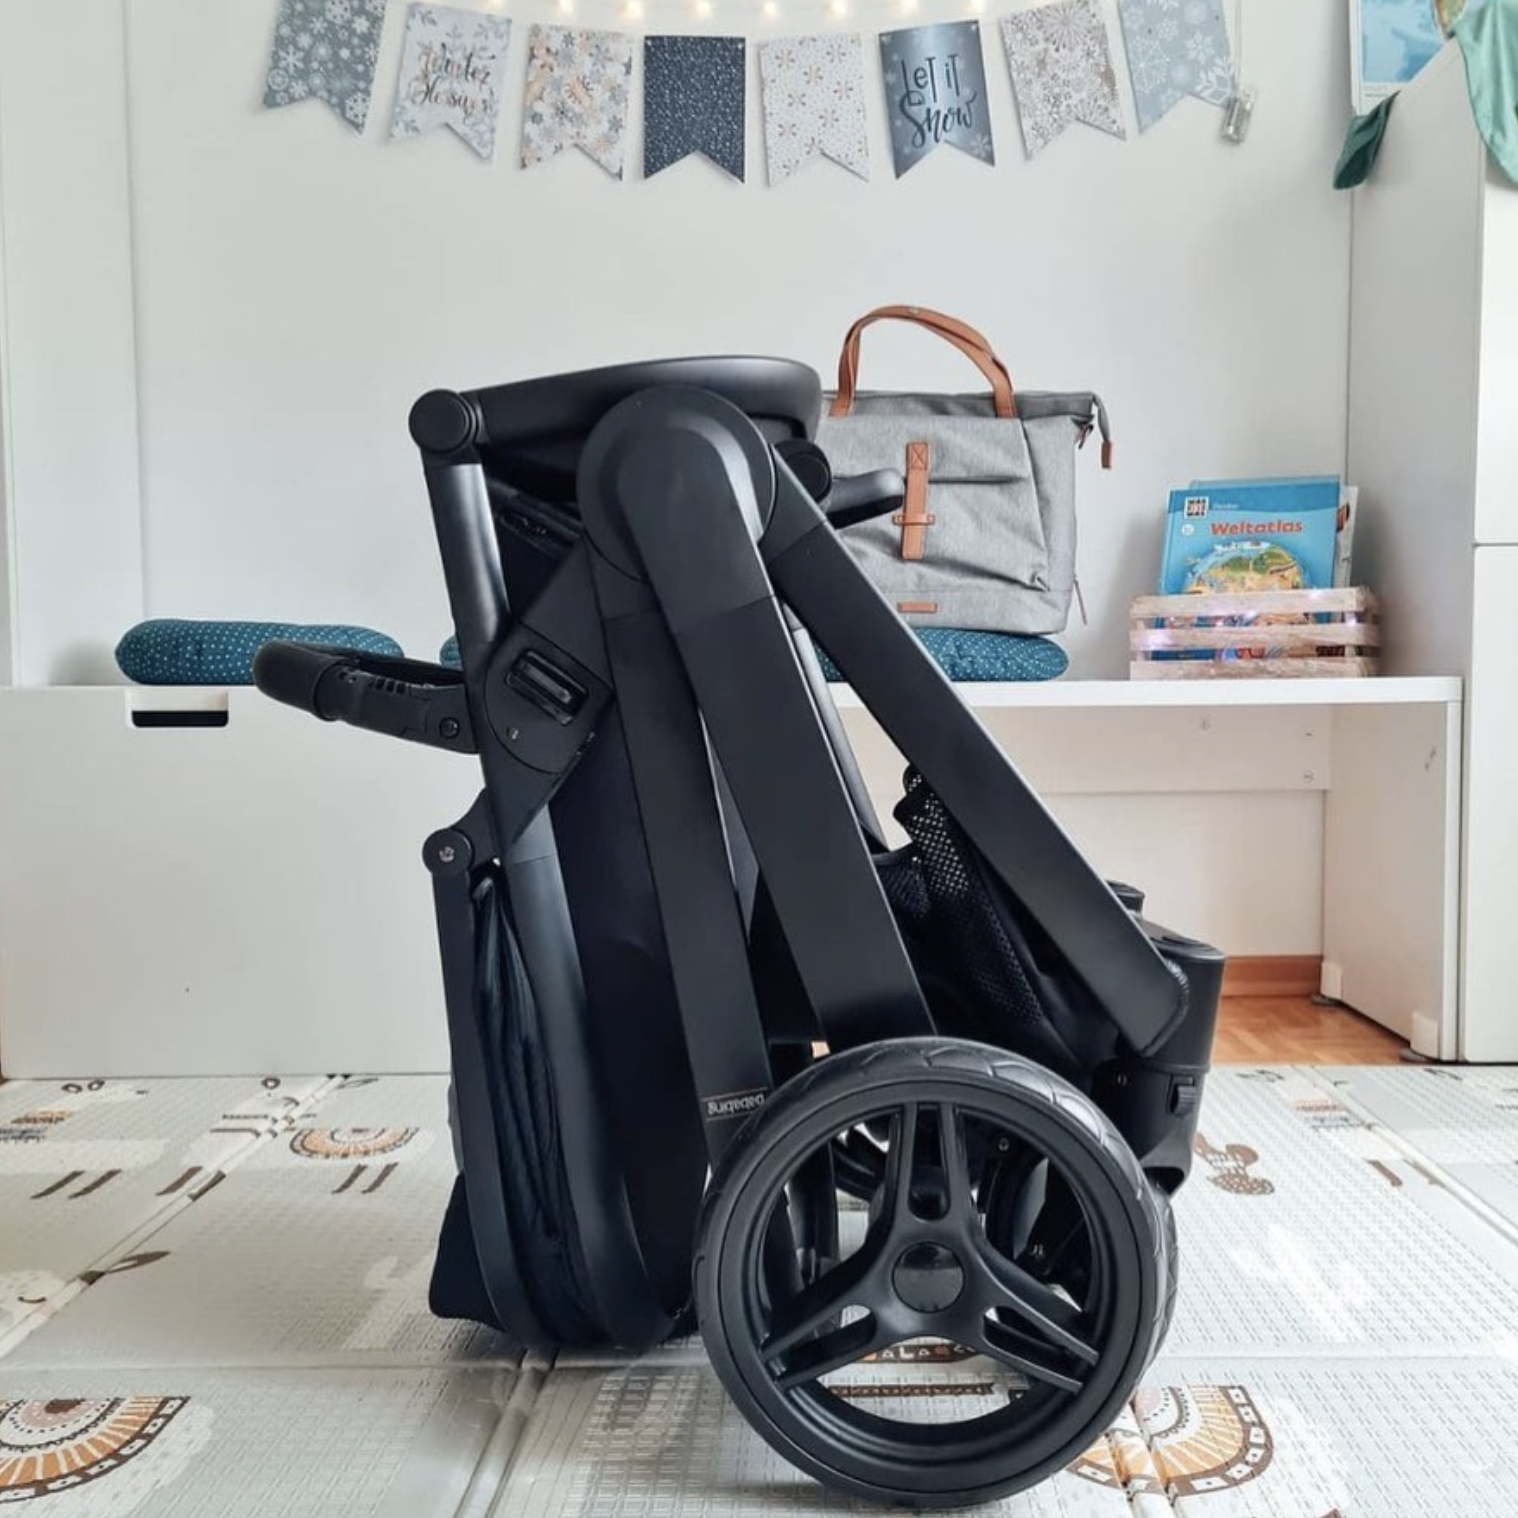 Raffi Travel System and Erin Tote Bag from Bababing!